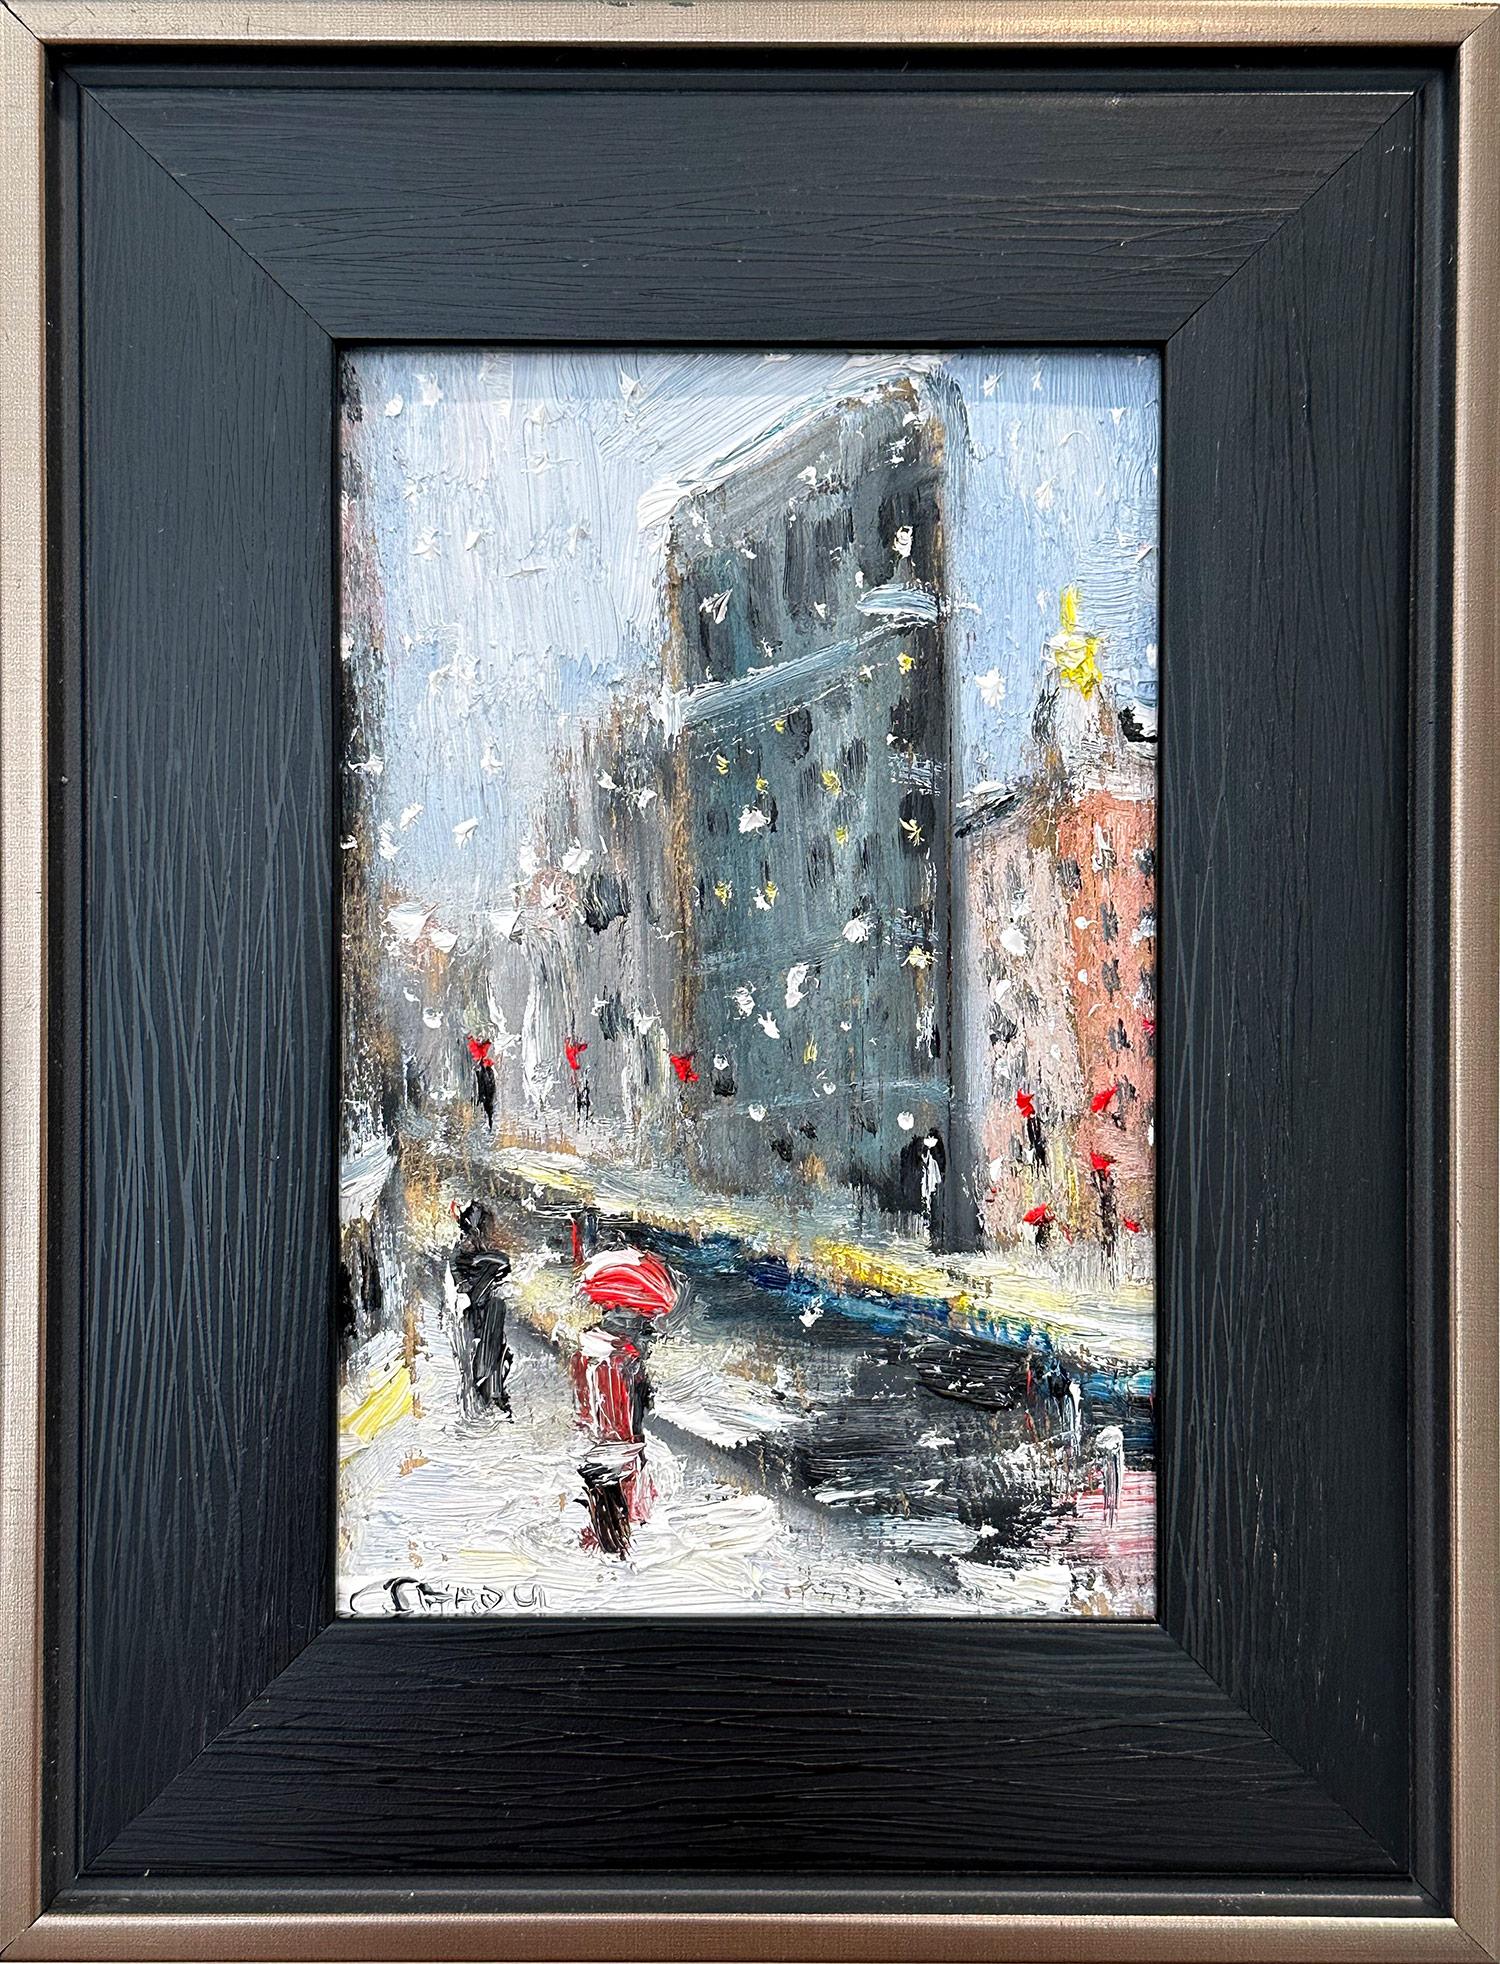 Cindy Shaoul Figurative Painting - "Snow By Flatiron" Impressionistic Oil Painting New York City Landscape in Snow 